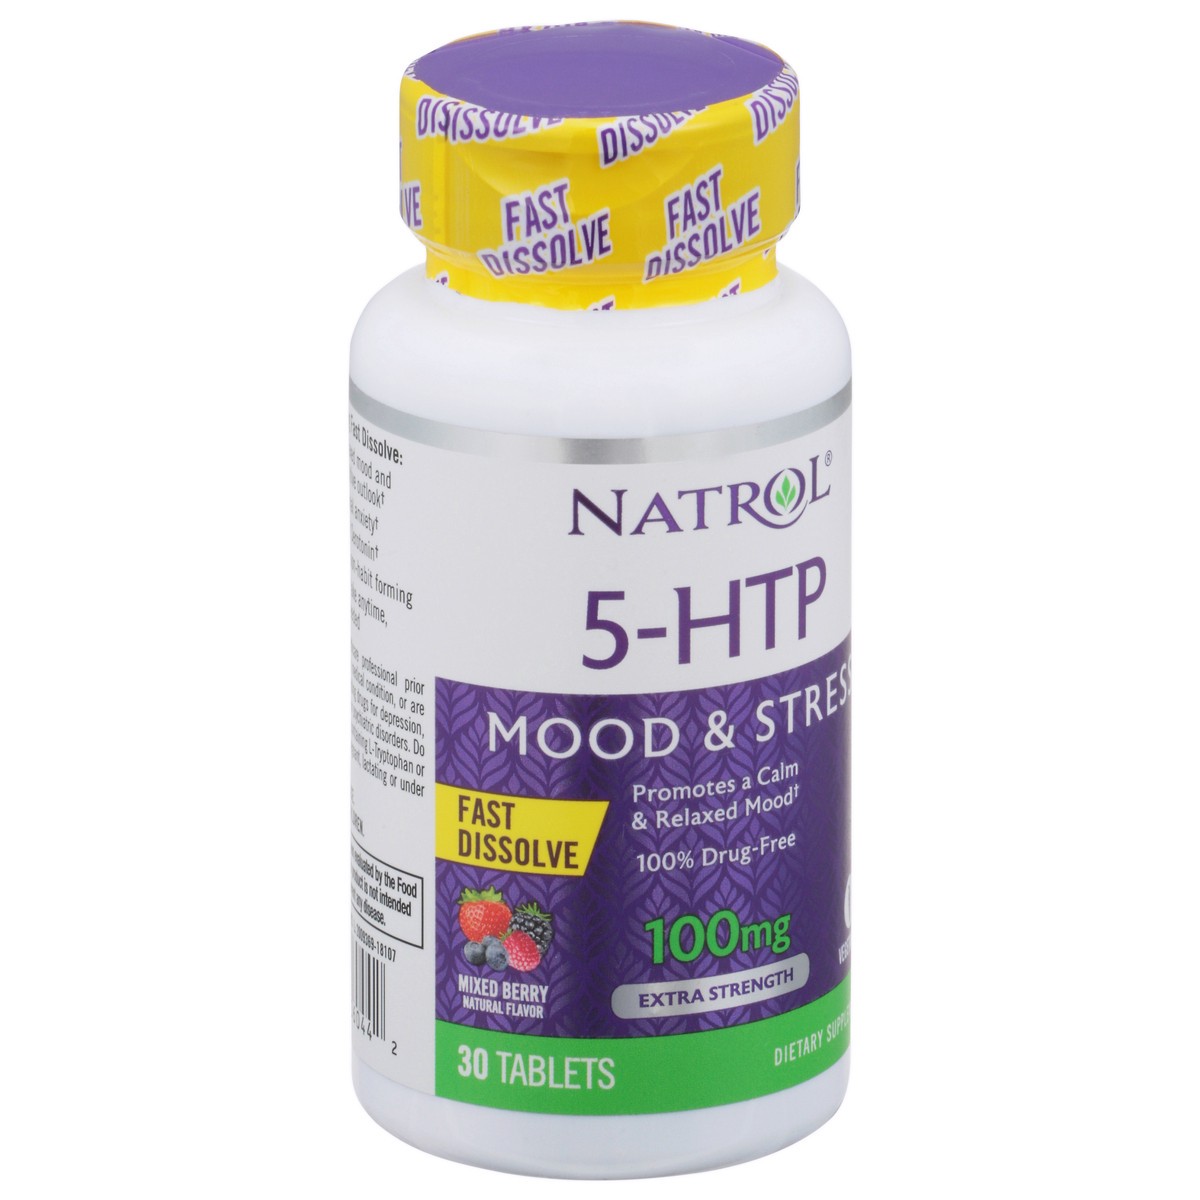 slide 8 of 14, Natrol 5-HTP 100mg, Drug-Free Dietary Supplement Helps Support Balanced Mood, 30 Mixed Berry-Flavored Fast Dissolve Tablets, 15-30 Day Supply, 30 ct